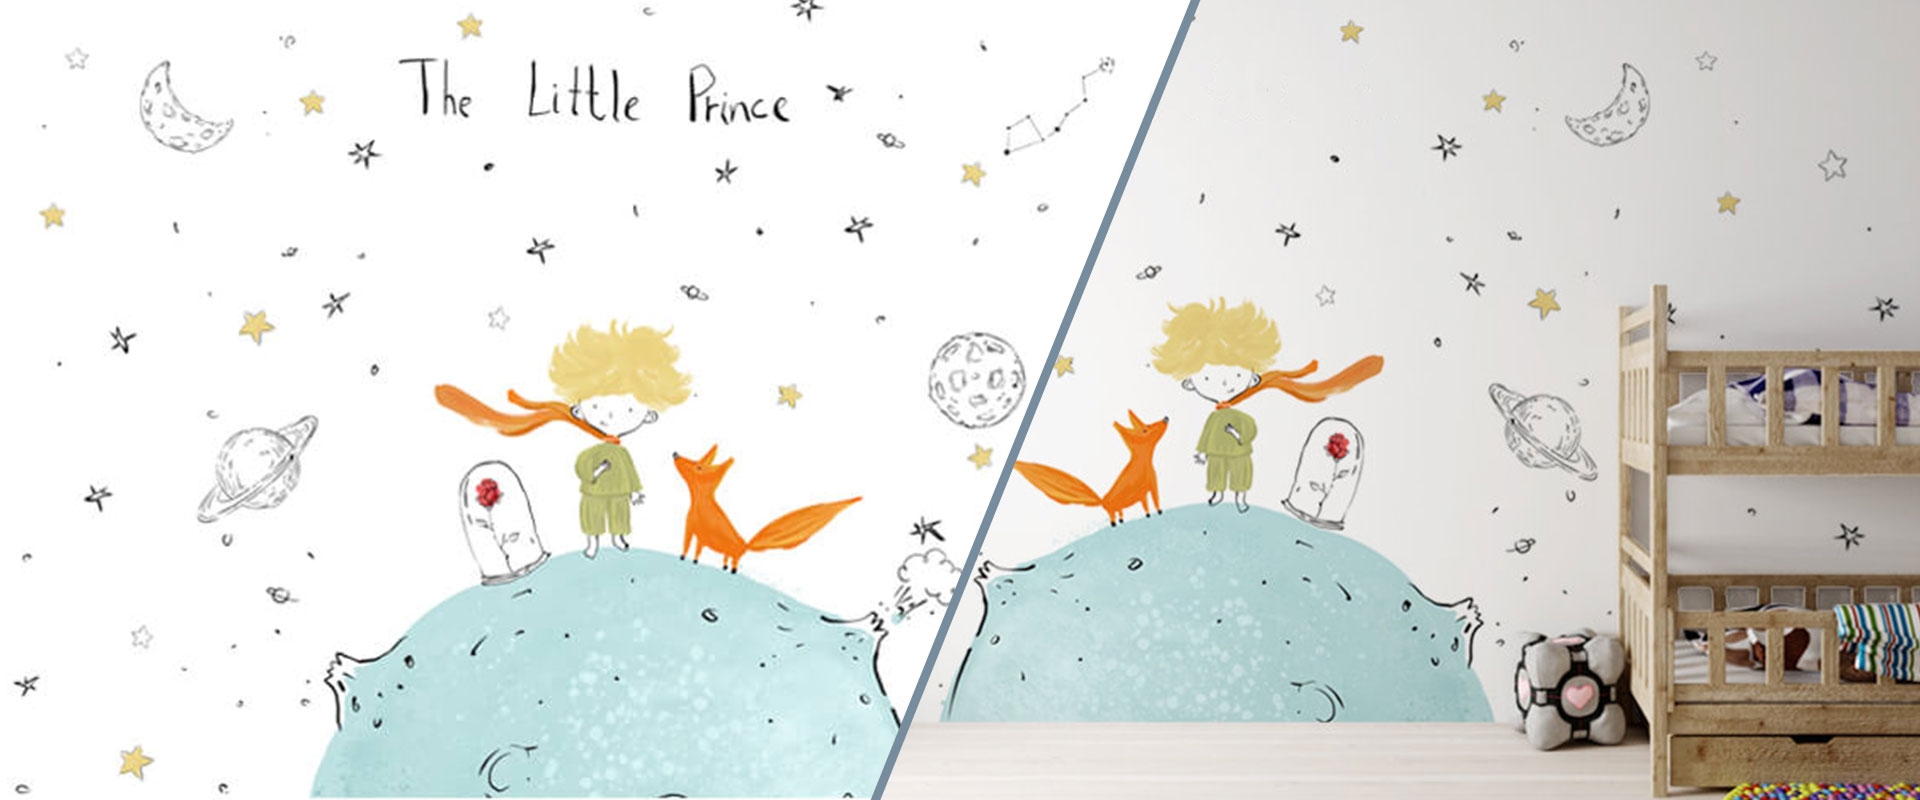 Wallpapers for kids The little prince - Фото 1